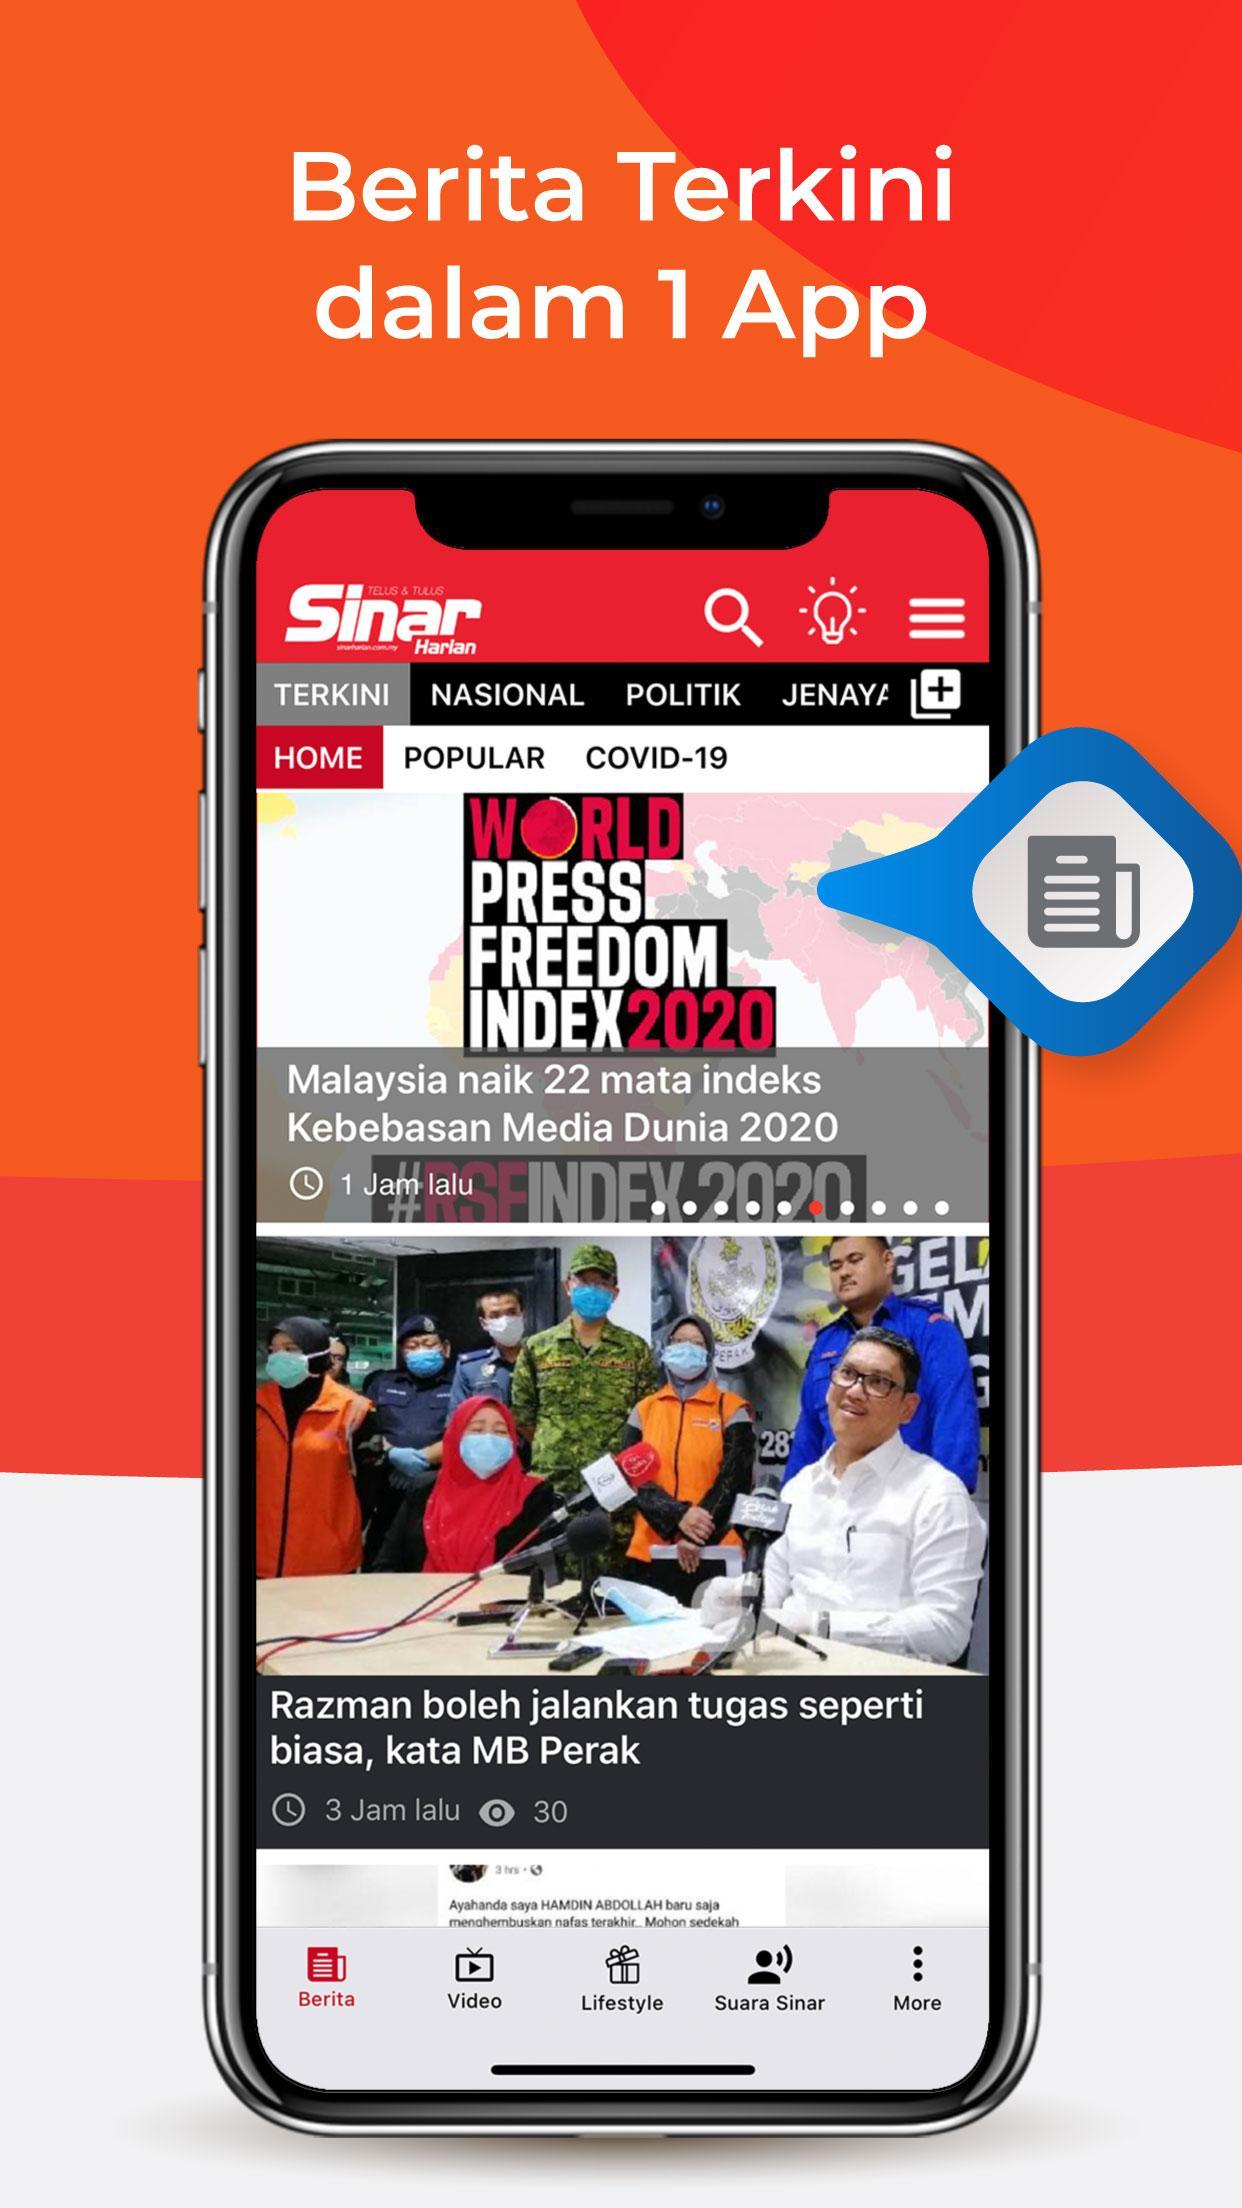 Sinar Harian for Android - APK Download